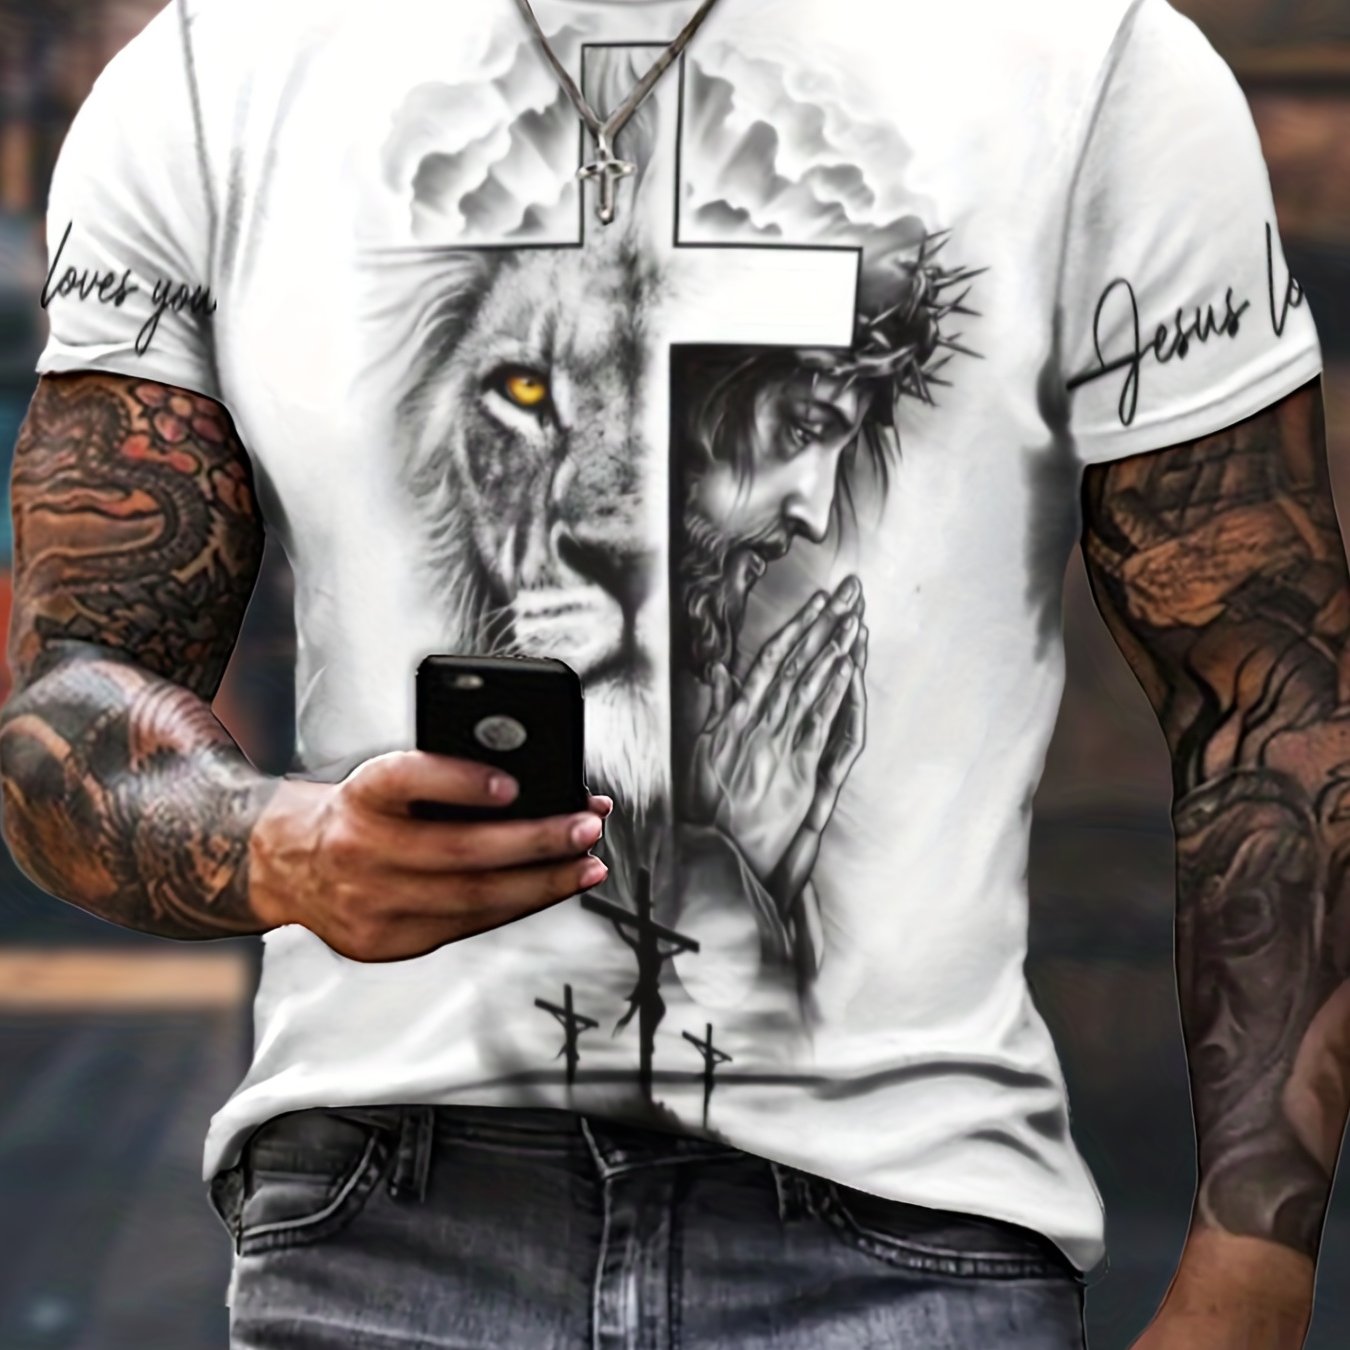 Stylish Cross & Lion Pattern Print Men's Comfy Chic T-shirt, Graphic Tee Men's Summer Outdoor Clothes, Men's Clothing, Tops For Men, Gift For Men